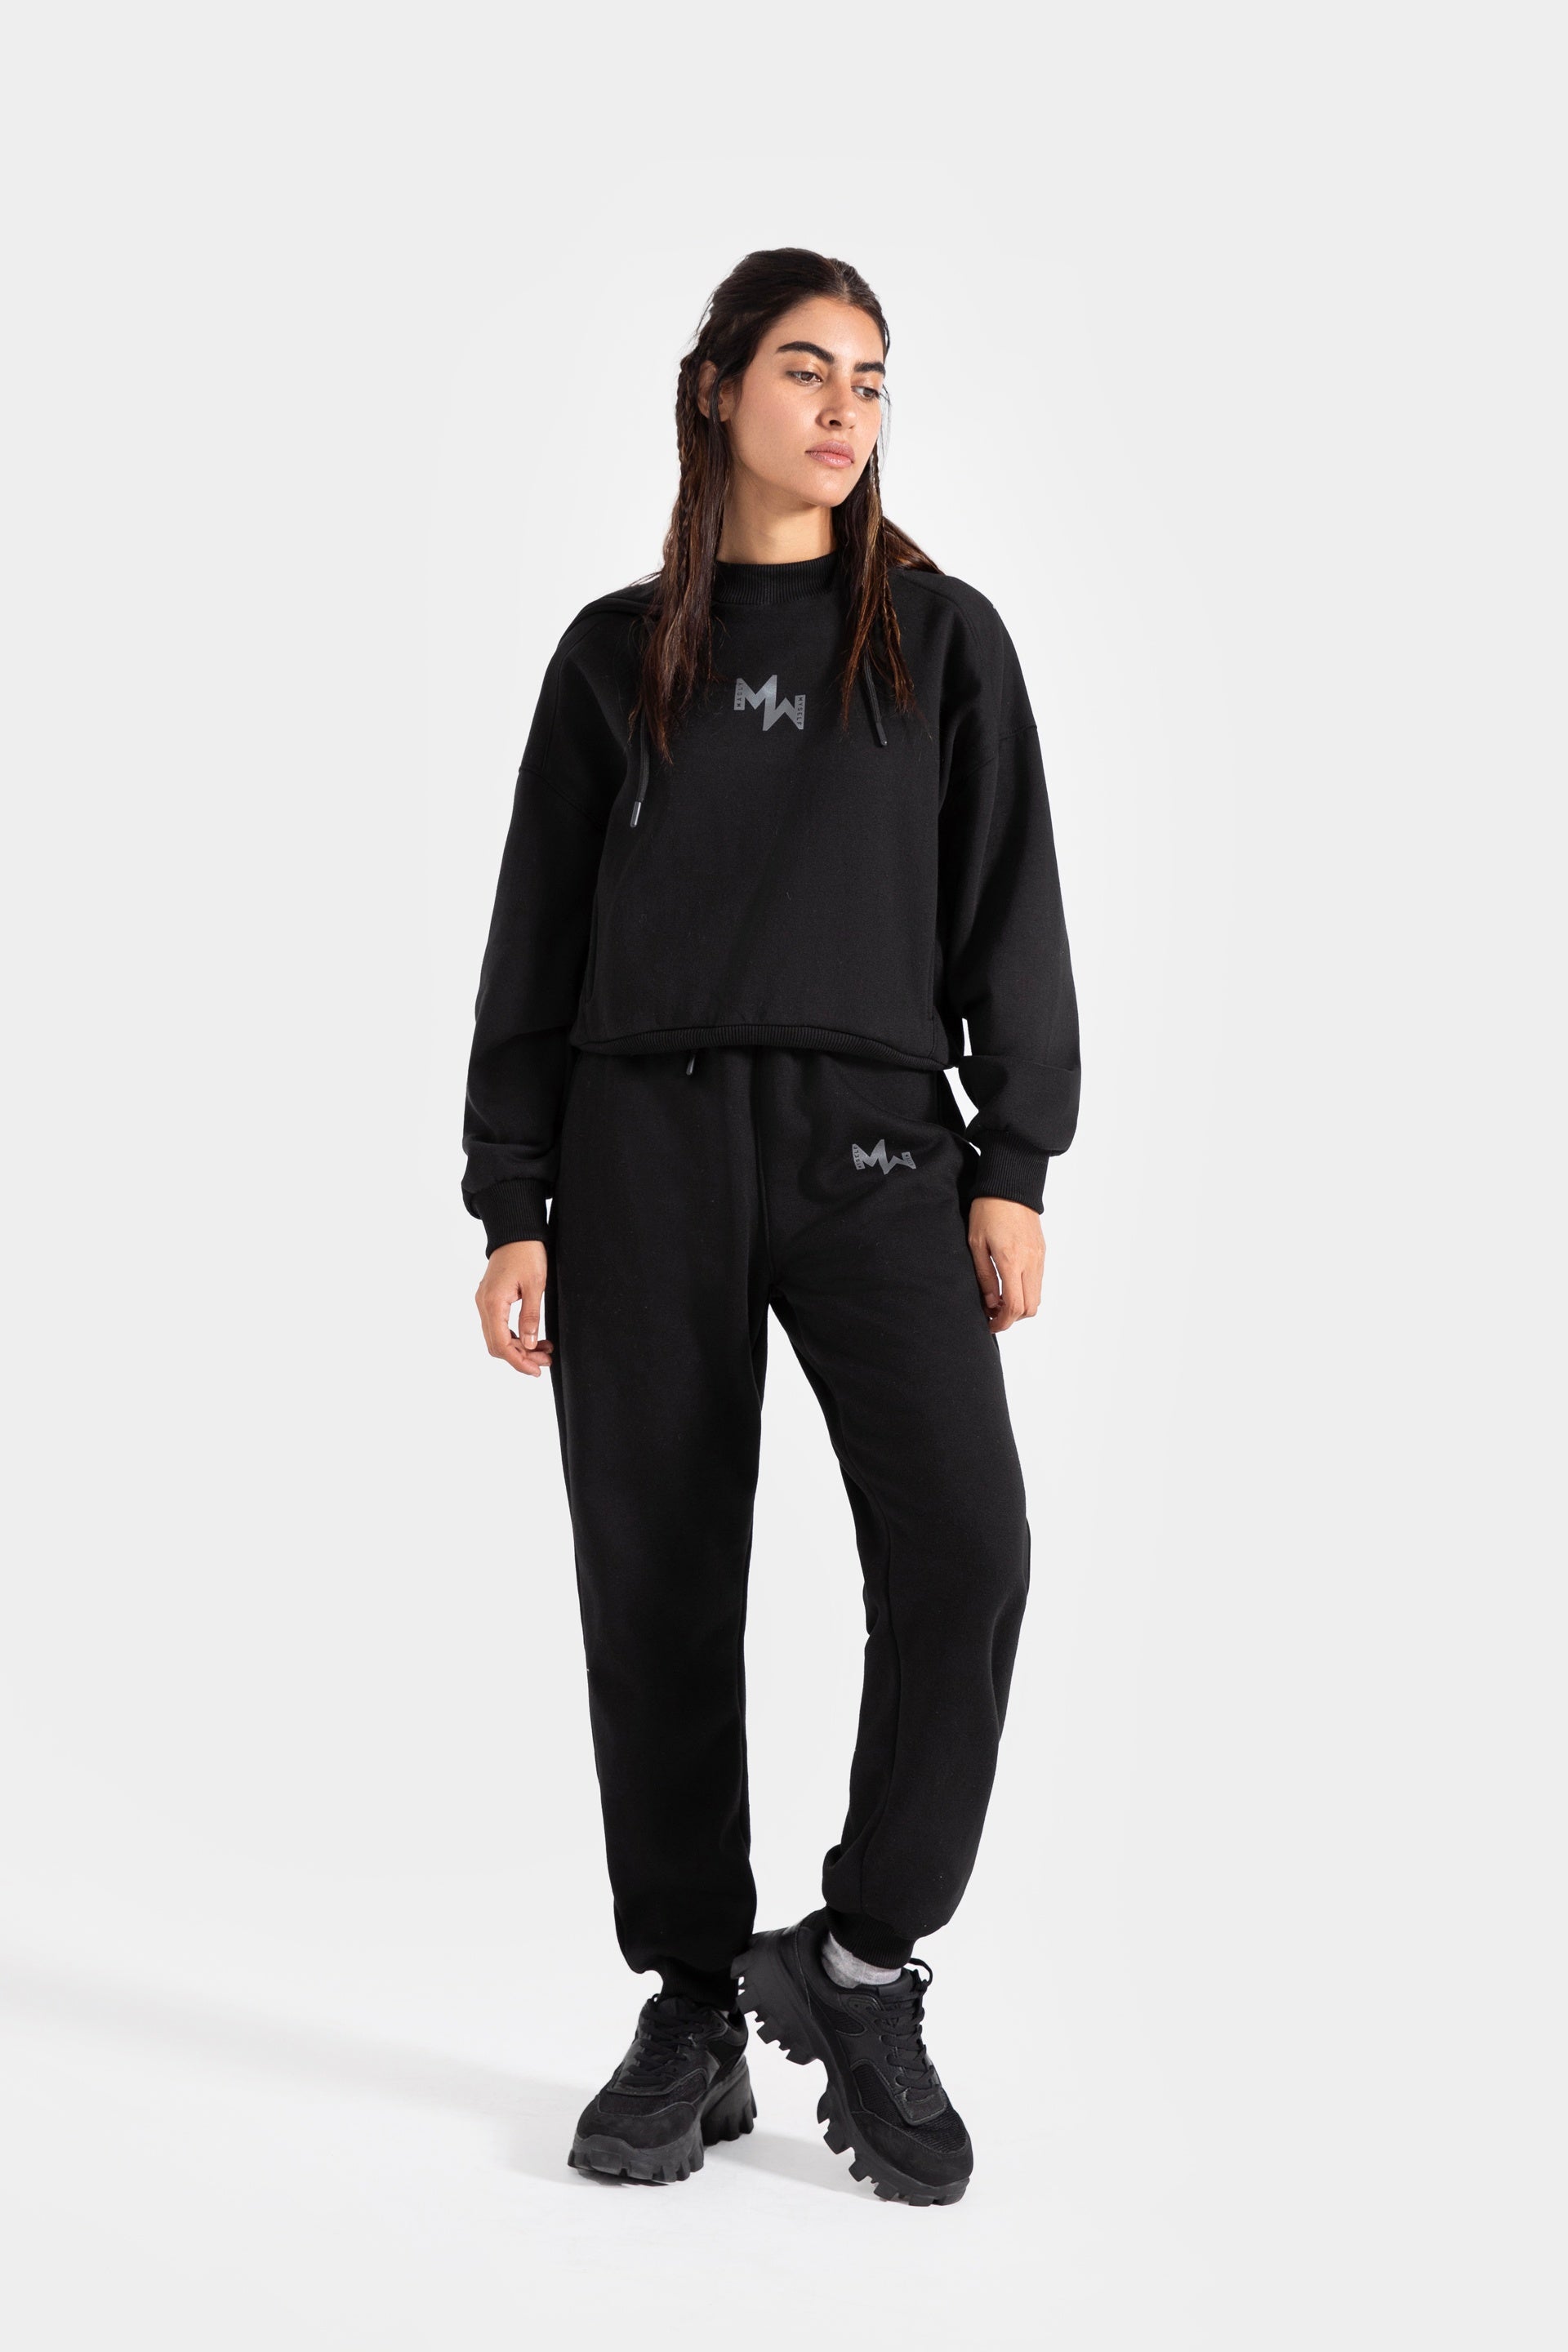 ACTIVEWEAR hoodie – Outfitters